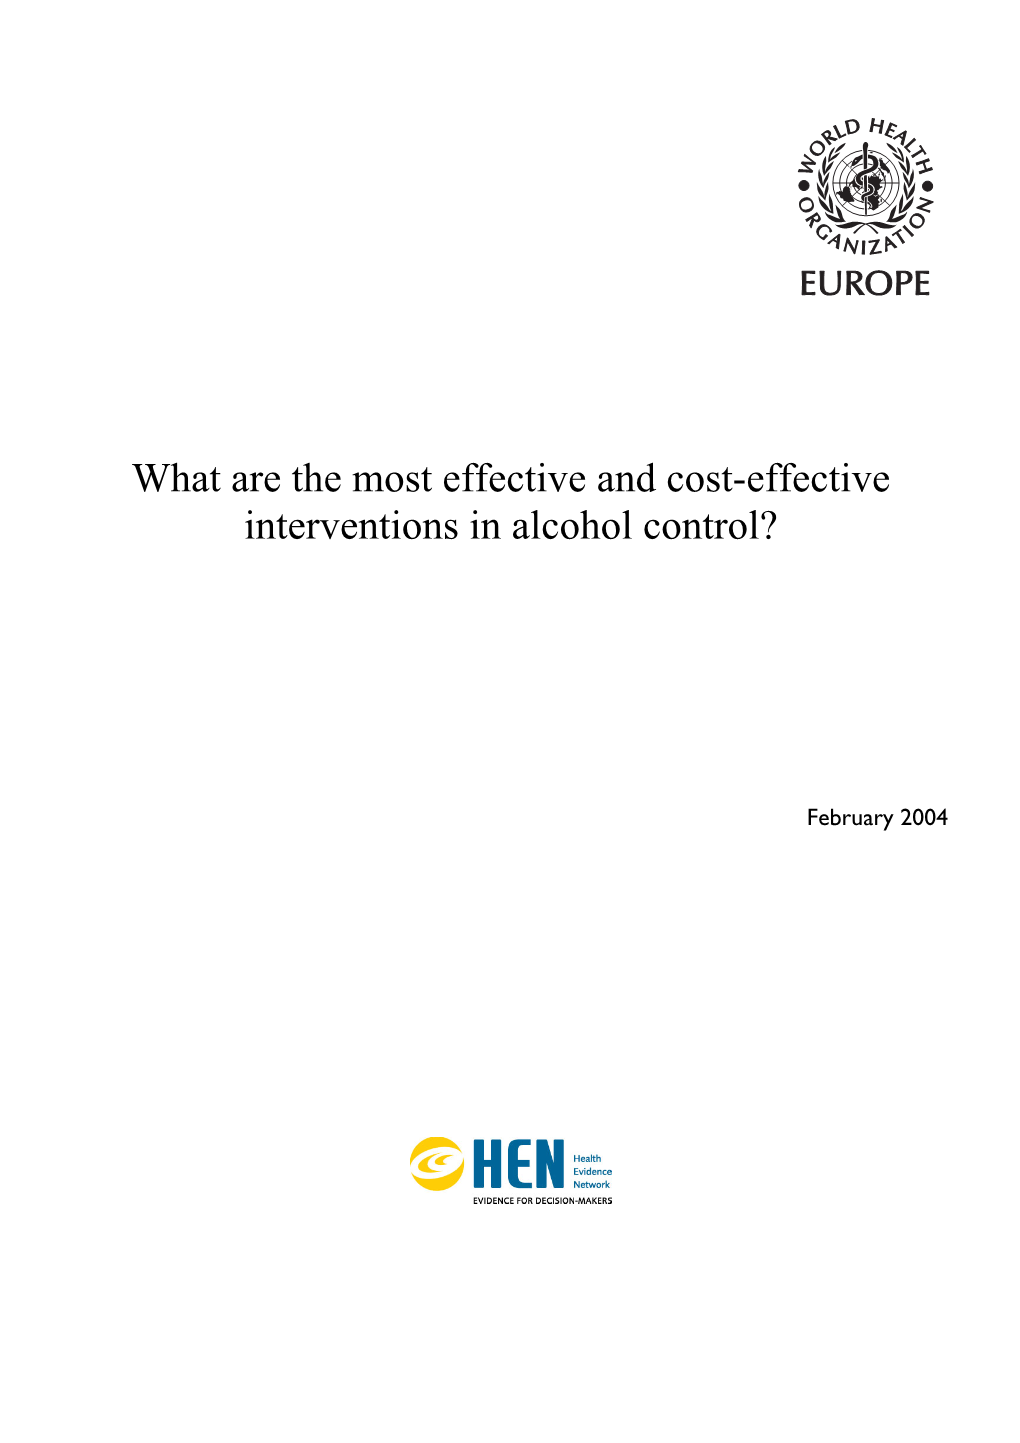 What Are the Most Effective and Cost-Effective Interventions in Alcohol Control?